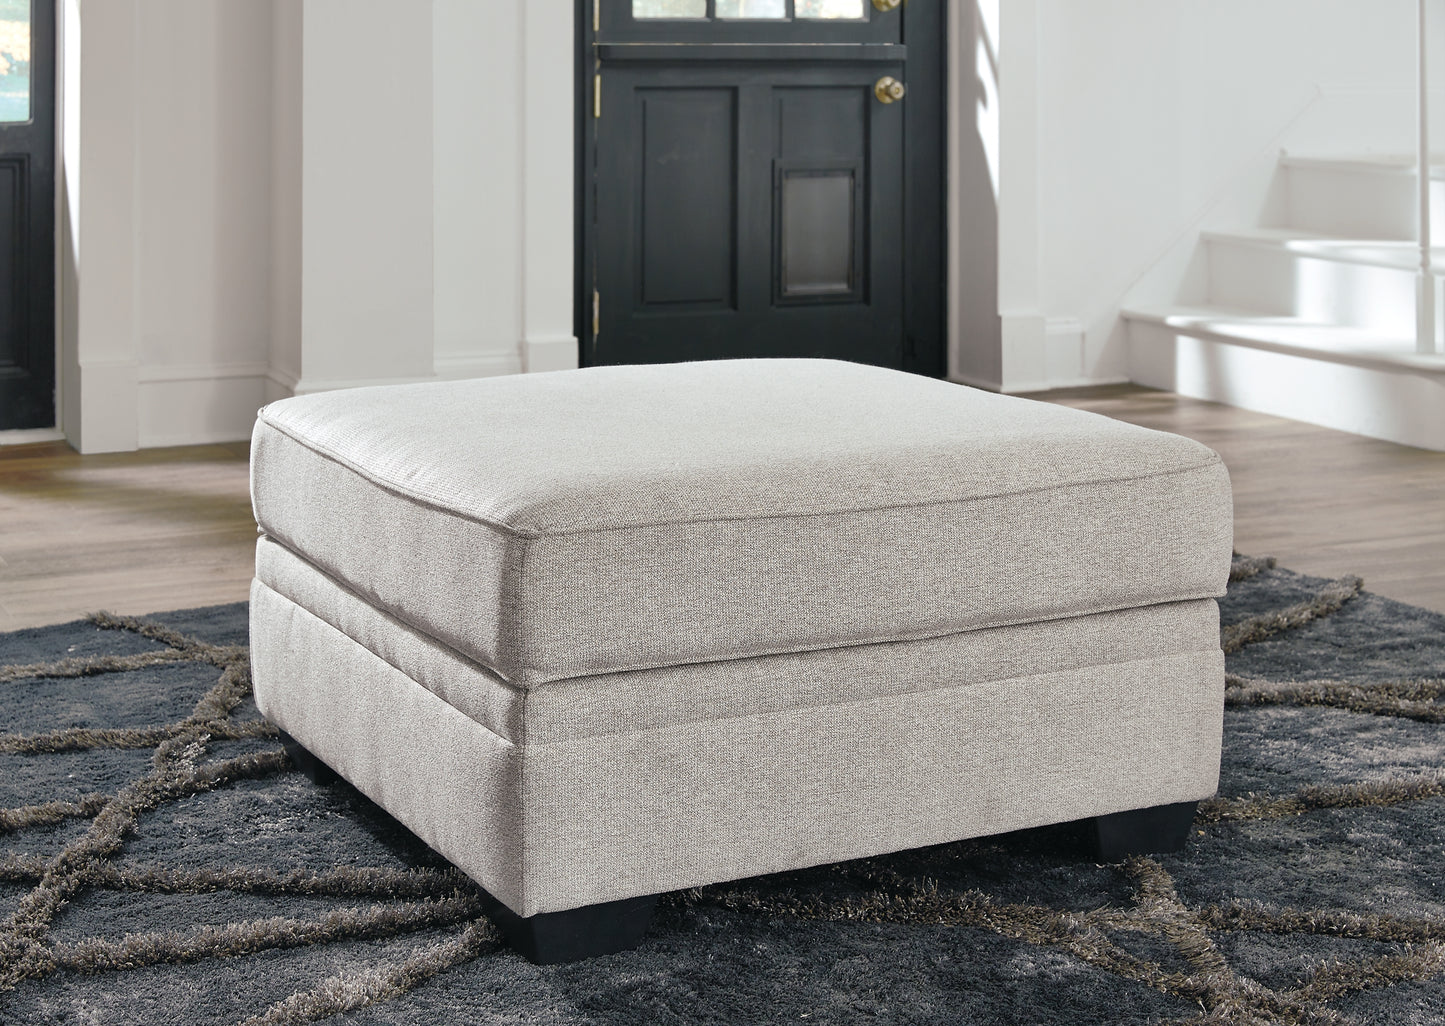 Dellara 3-Piece Sectional with Ottoman